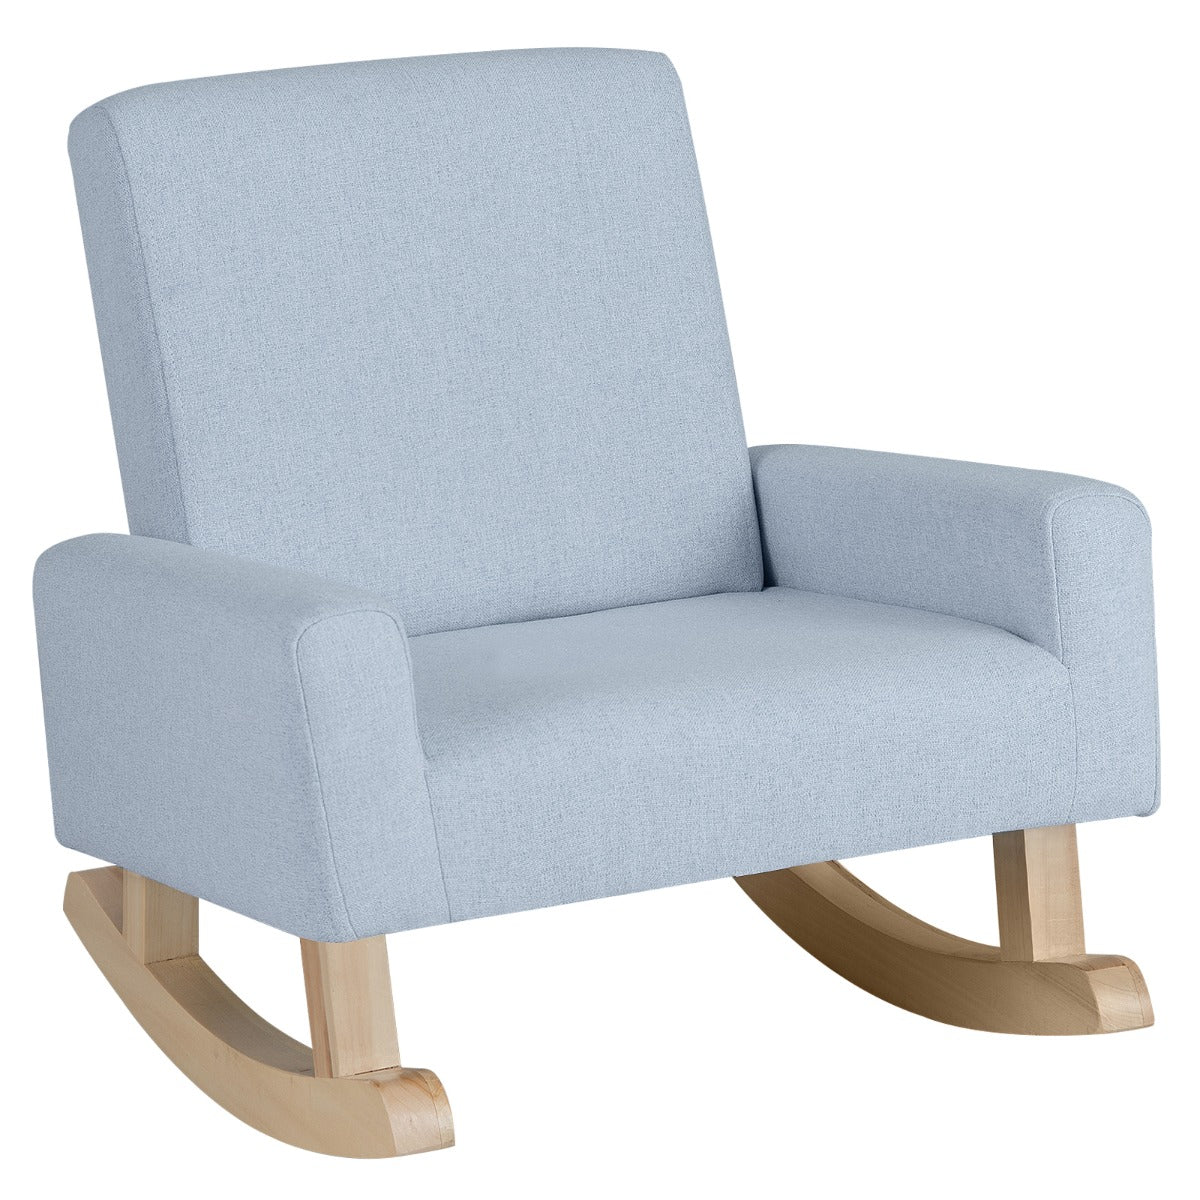 Blue Kids Rocking Chair - Wood Legs, Anti-tipping Design for Safe Play